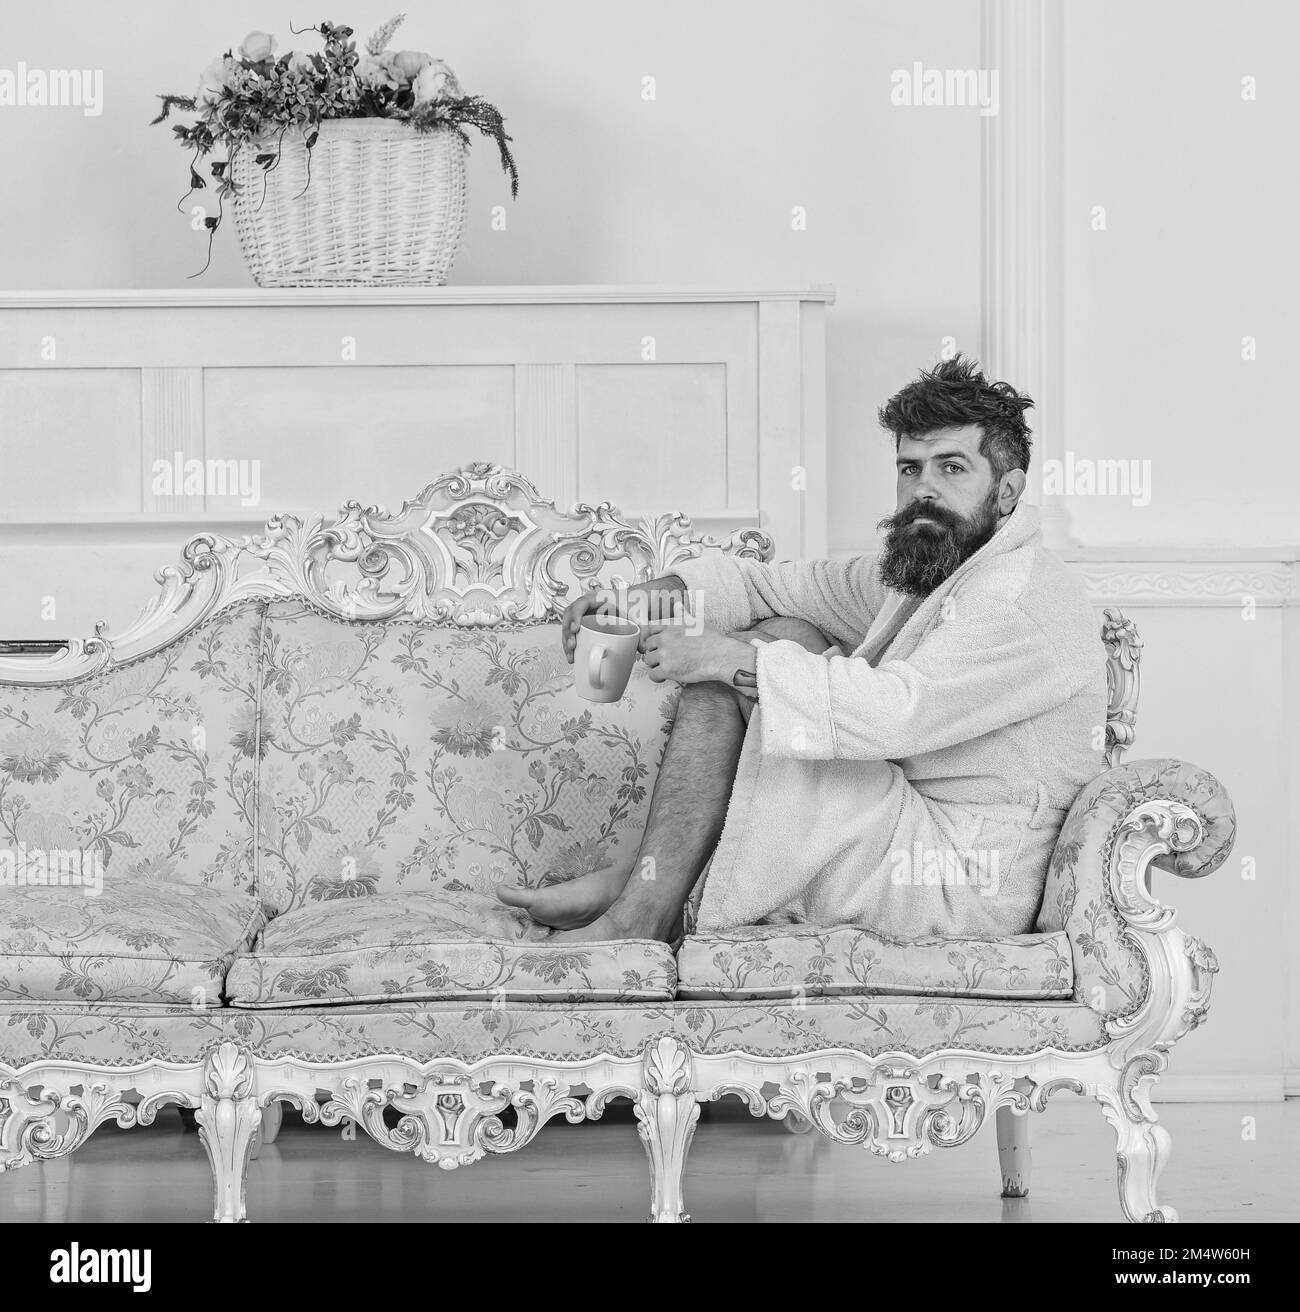 Man with beard and mustache enjoy morning while sitting on old fashioned luxury sofa. Luxury life concept. Man on thoughtful face in bathrobe drink Stock Photo